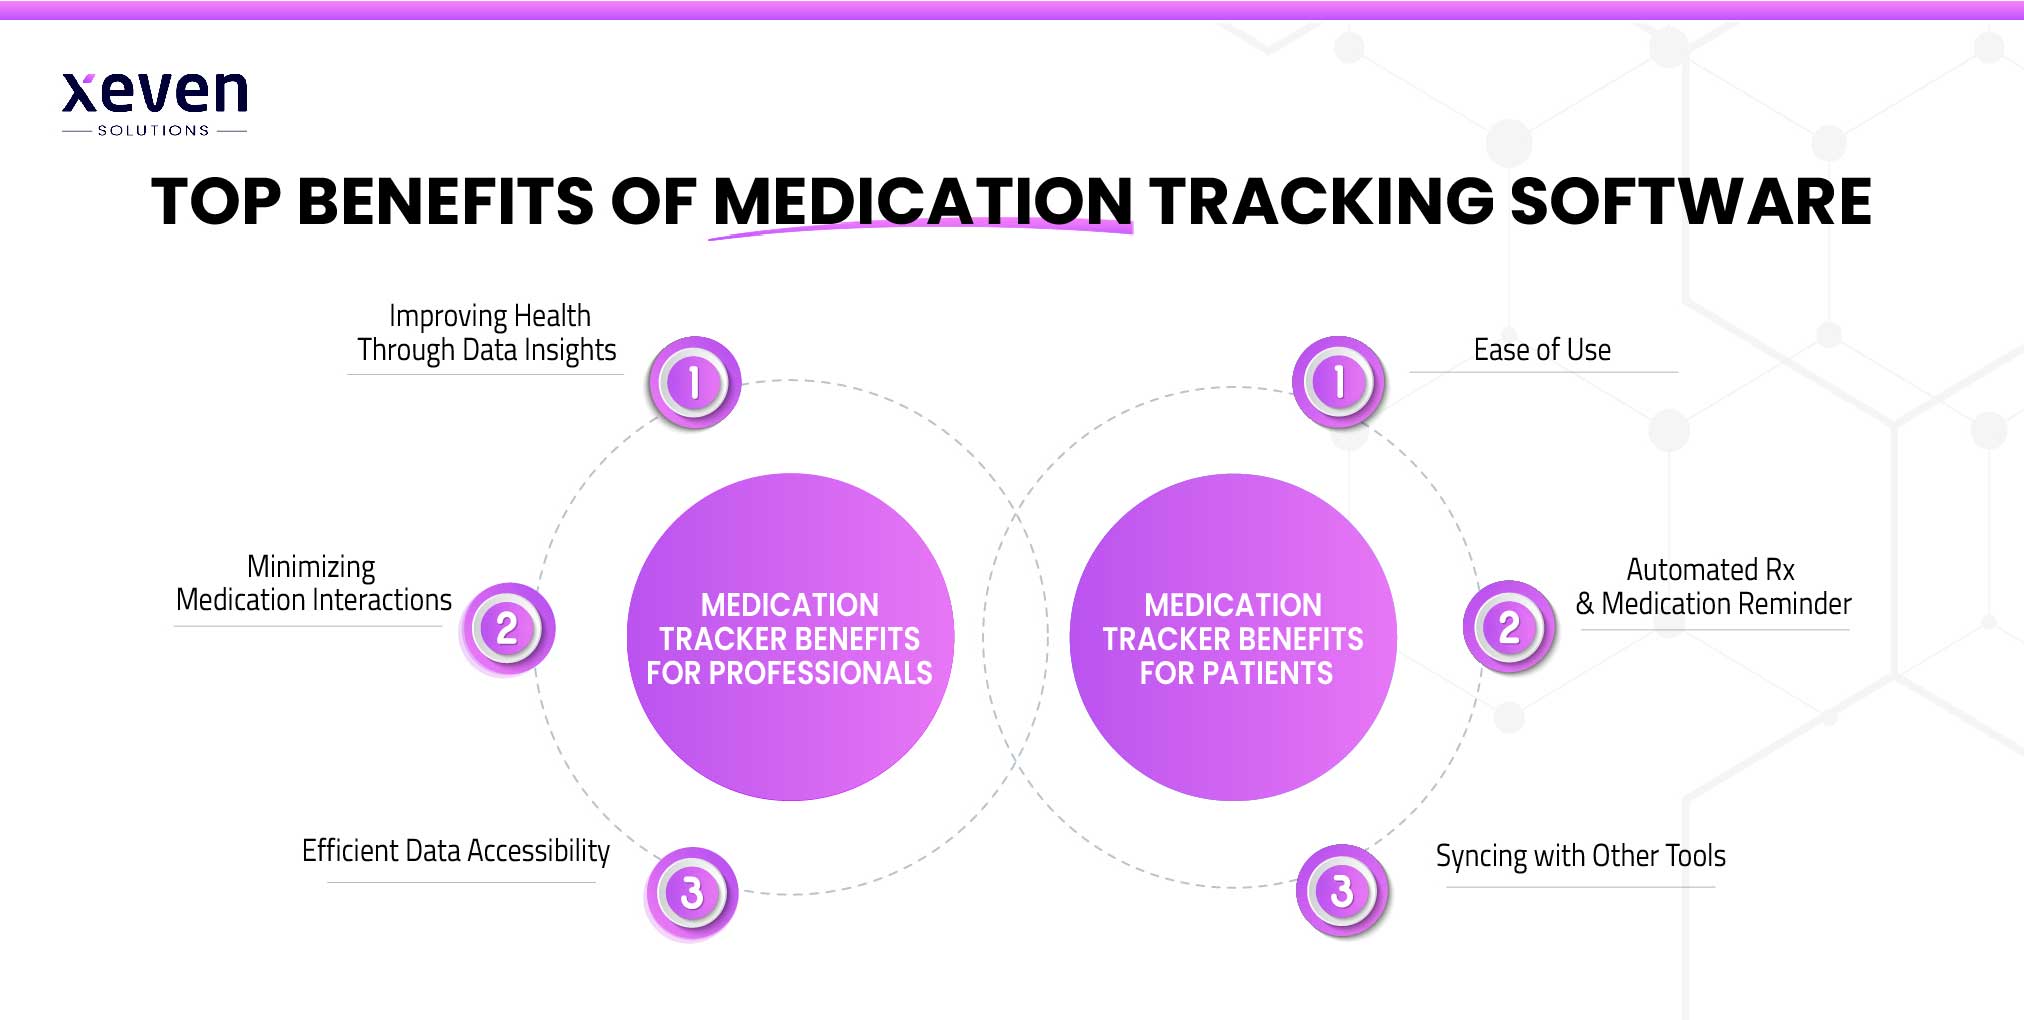 Top Benefits of Medication Tracking Software